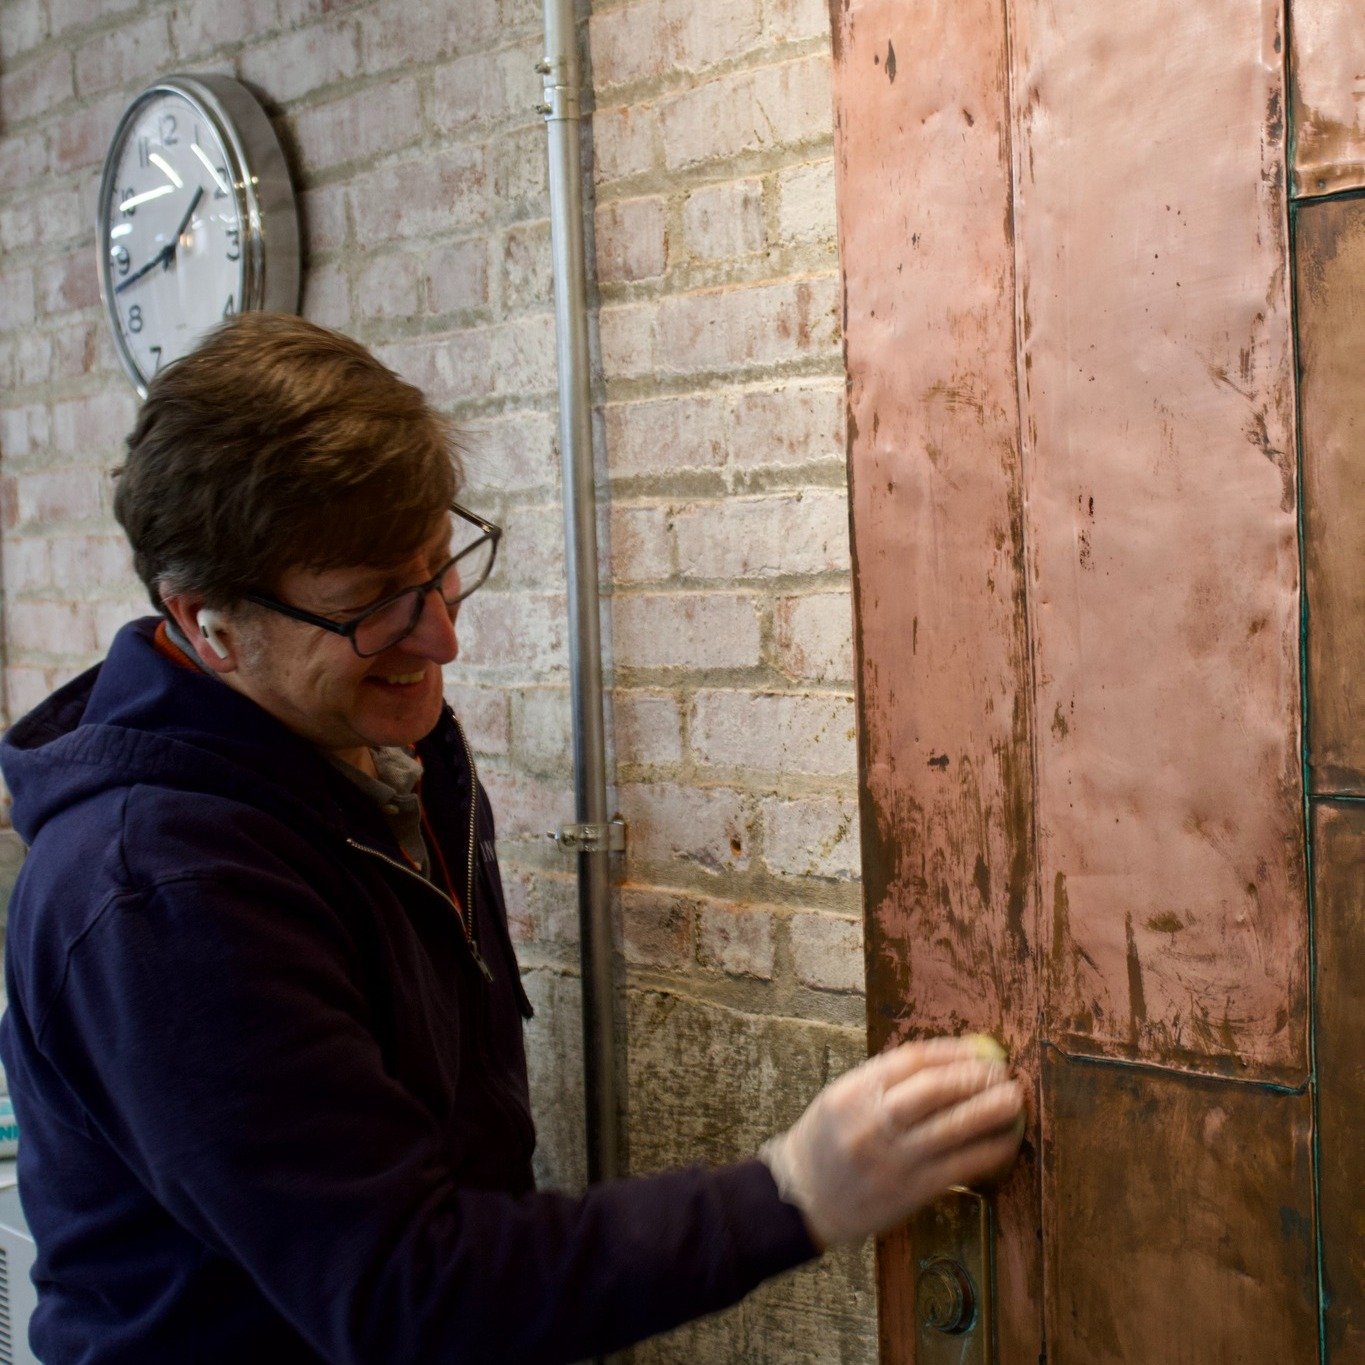 Did you know that we have 5 of the building&rsquo;s original copper clad doors in our lower level space?

Some people who remember The Substation prior to 1971 - back when it was in operation supplying power for local trollies - report that the MBTA 